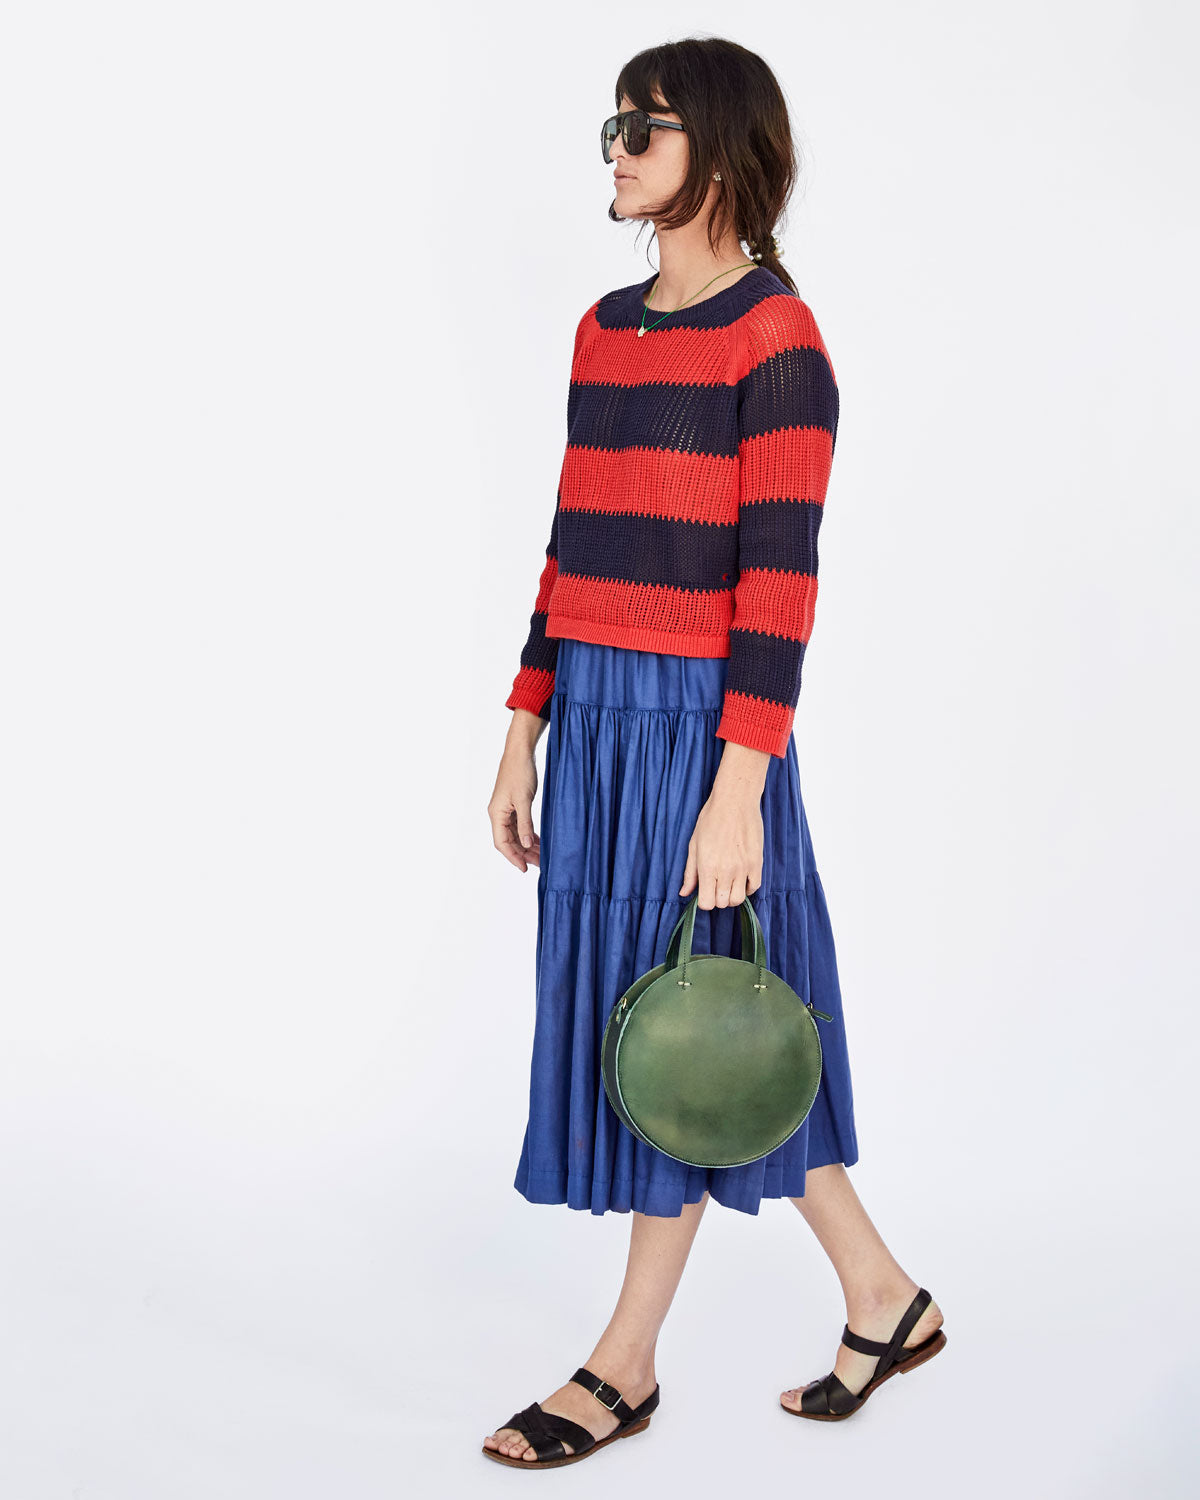 Danica in the Navy & Poppy Striped Open Weave Raglan Sweater with the Loden Petit Alistair and a Blue Skirt